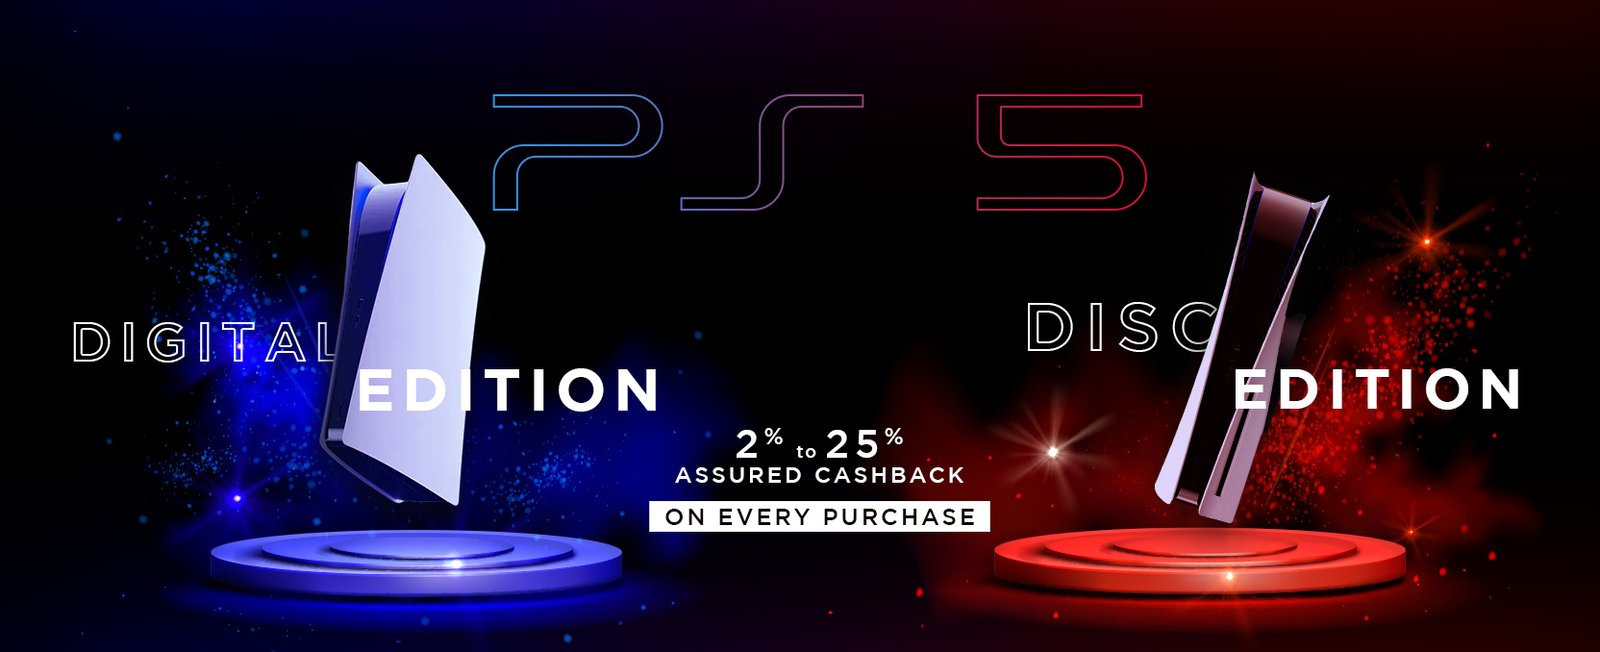 Sony Playstation Banner